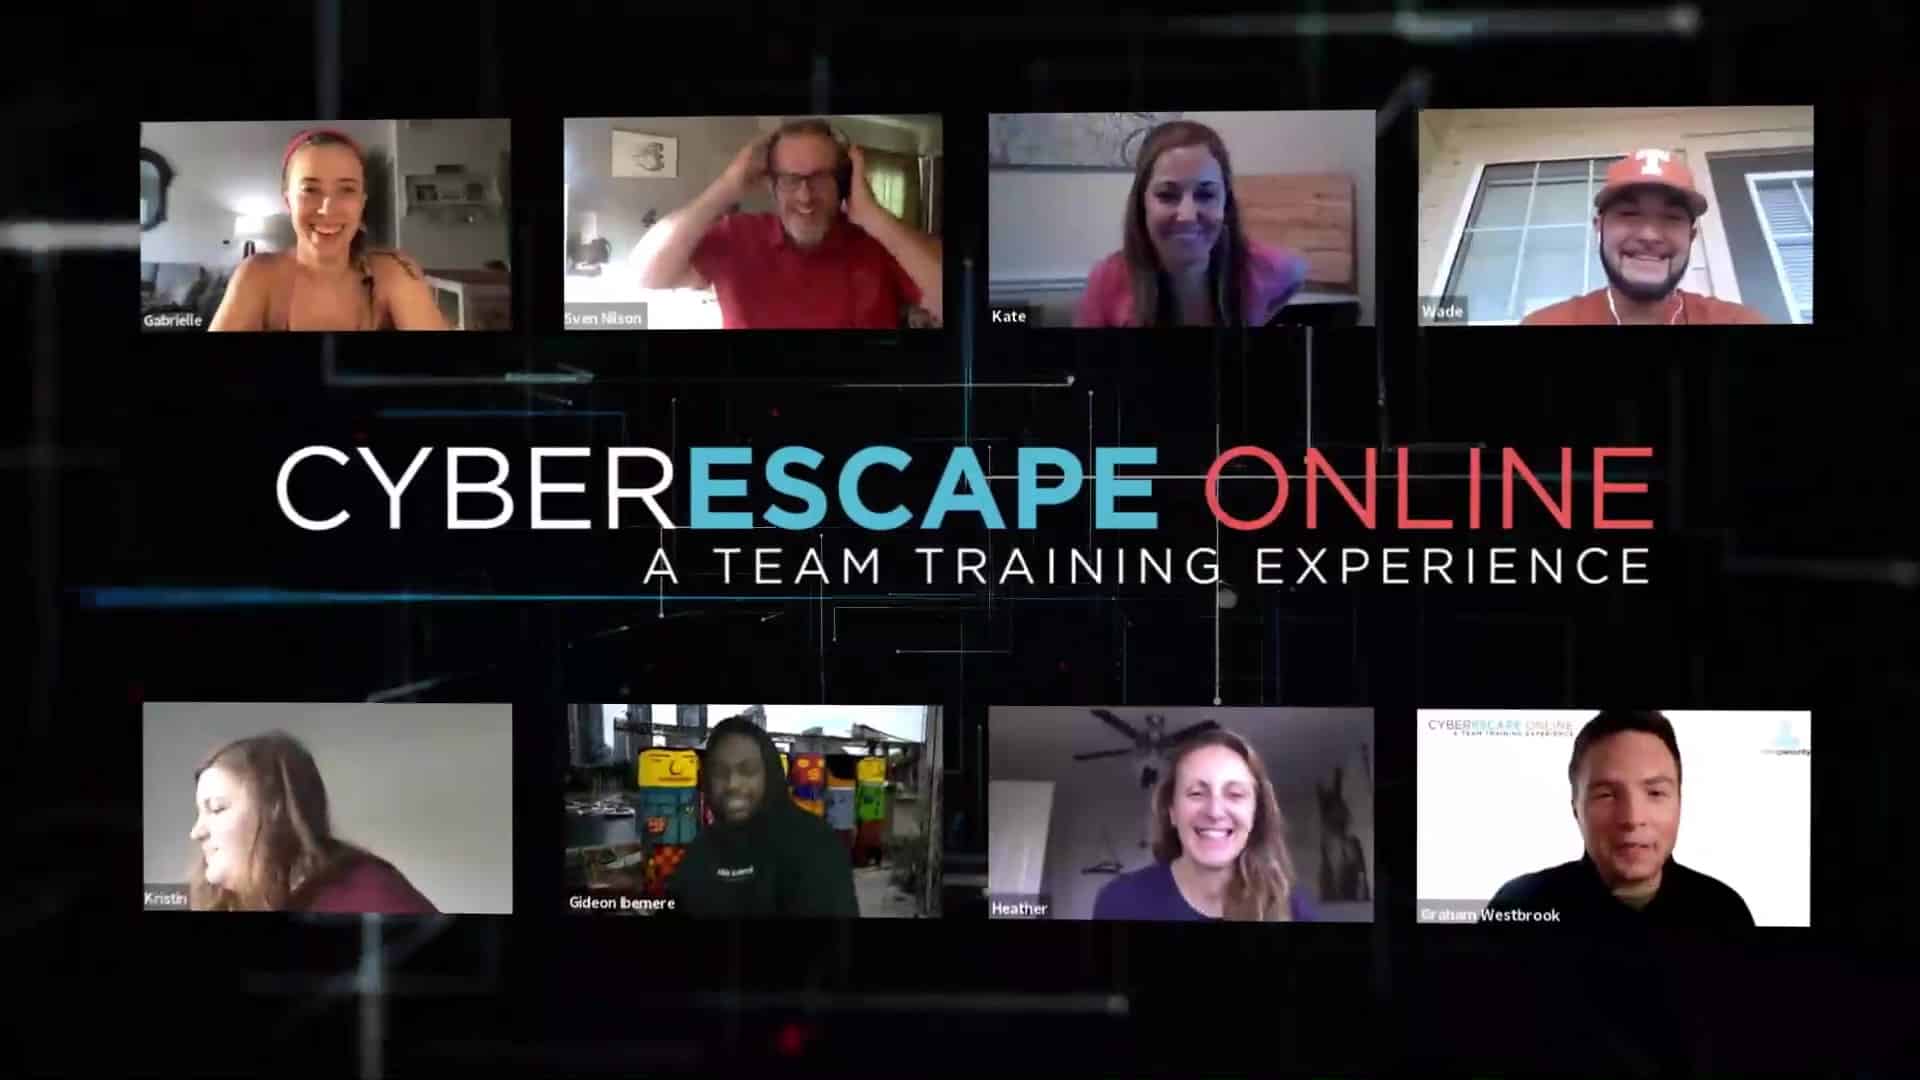 An image of people playing the game cyberescape online in an online meeting